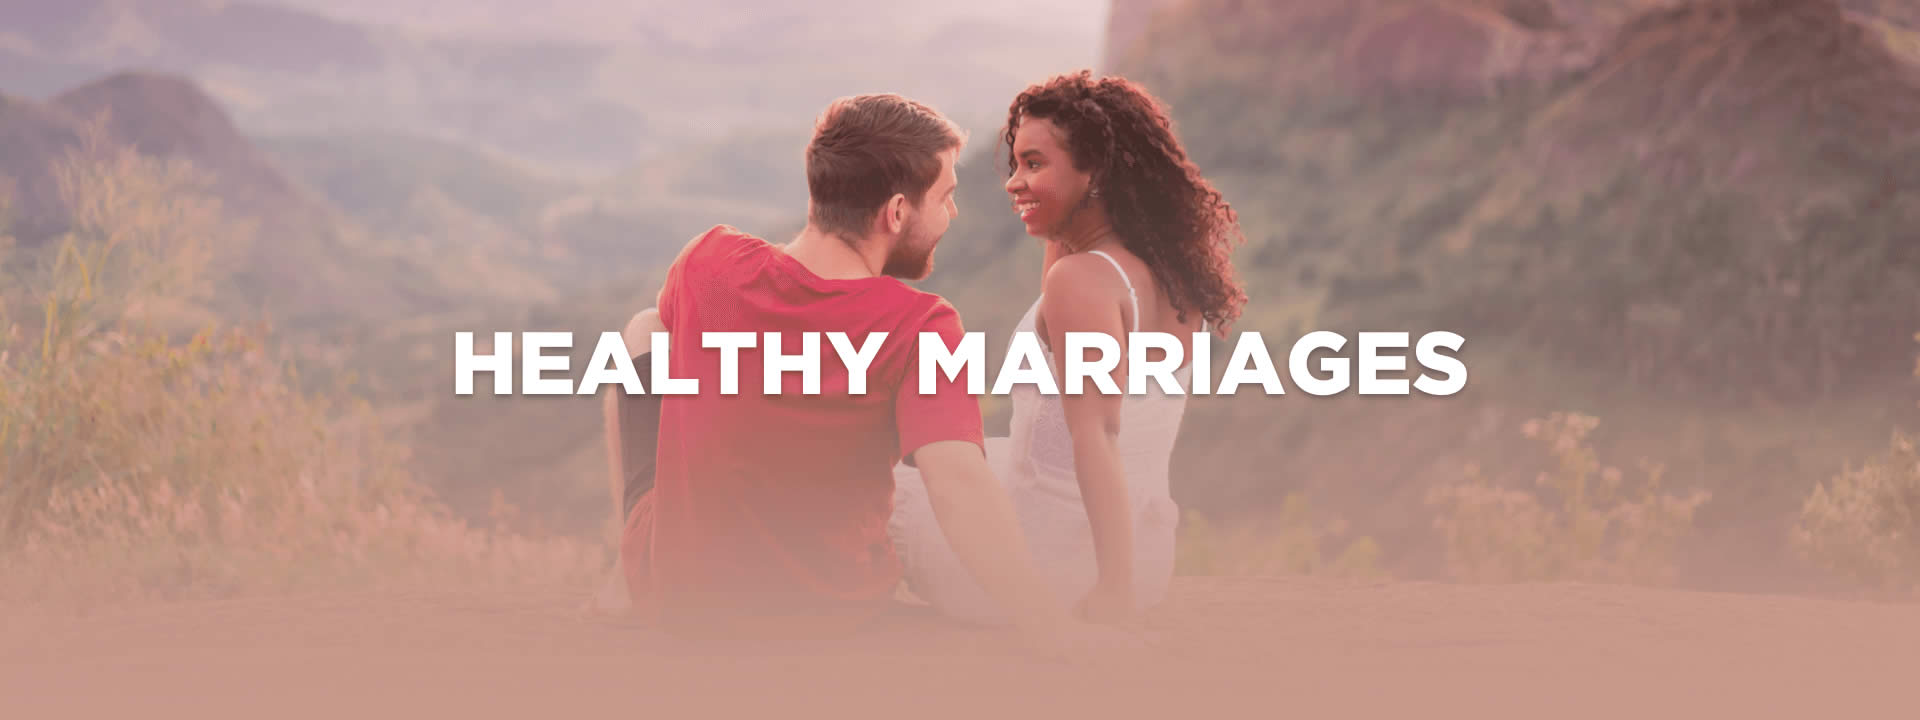 Healthy Marriage